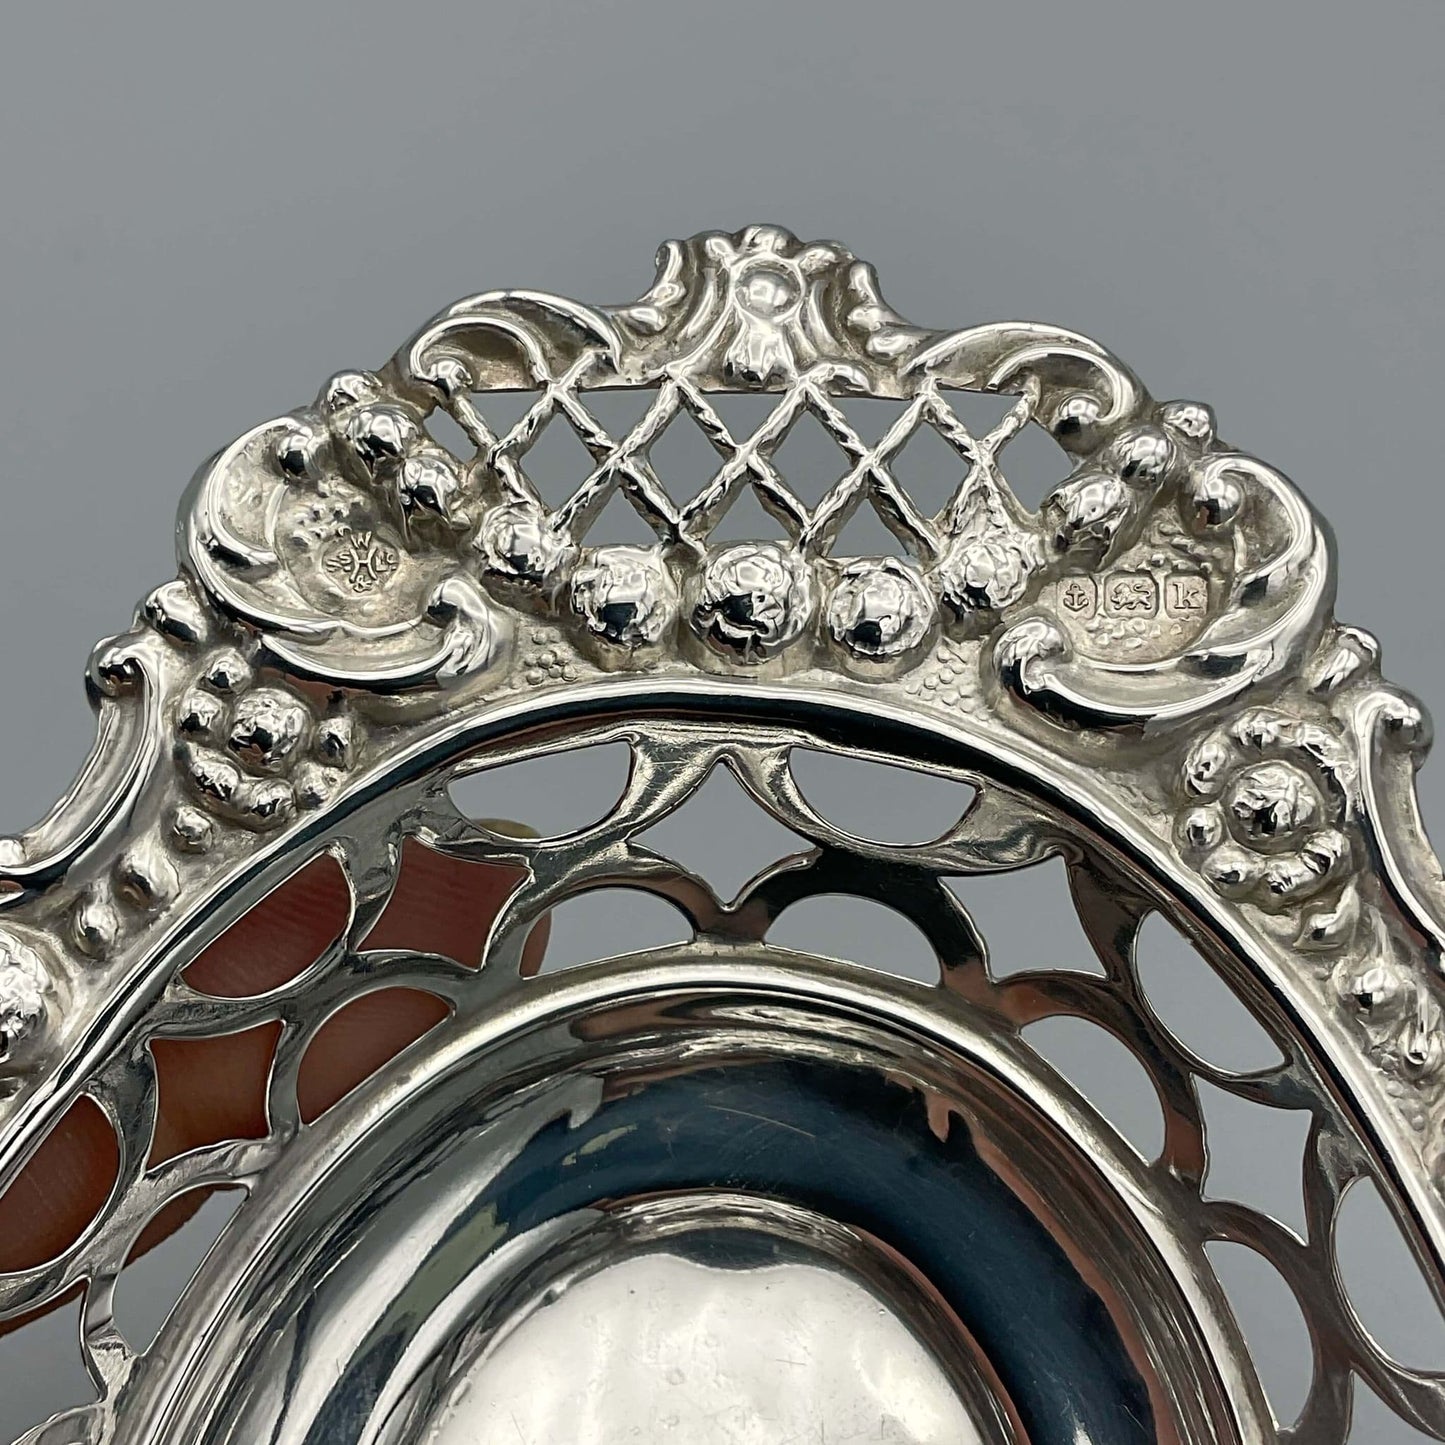 Hallmarks and makers mark hidden in the ornate design of the bowl